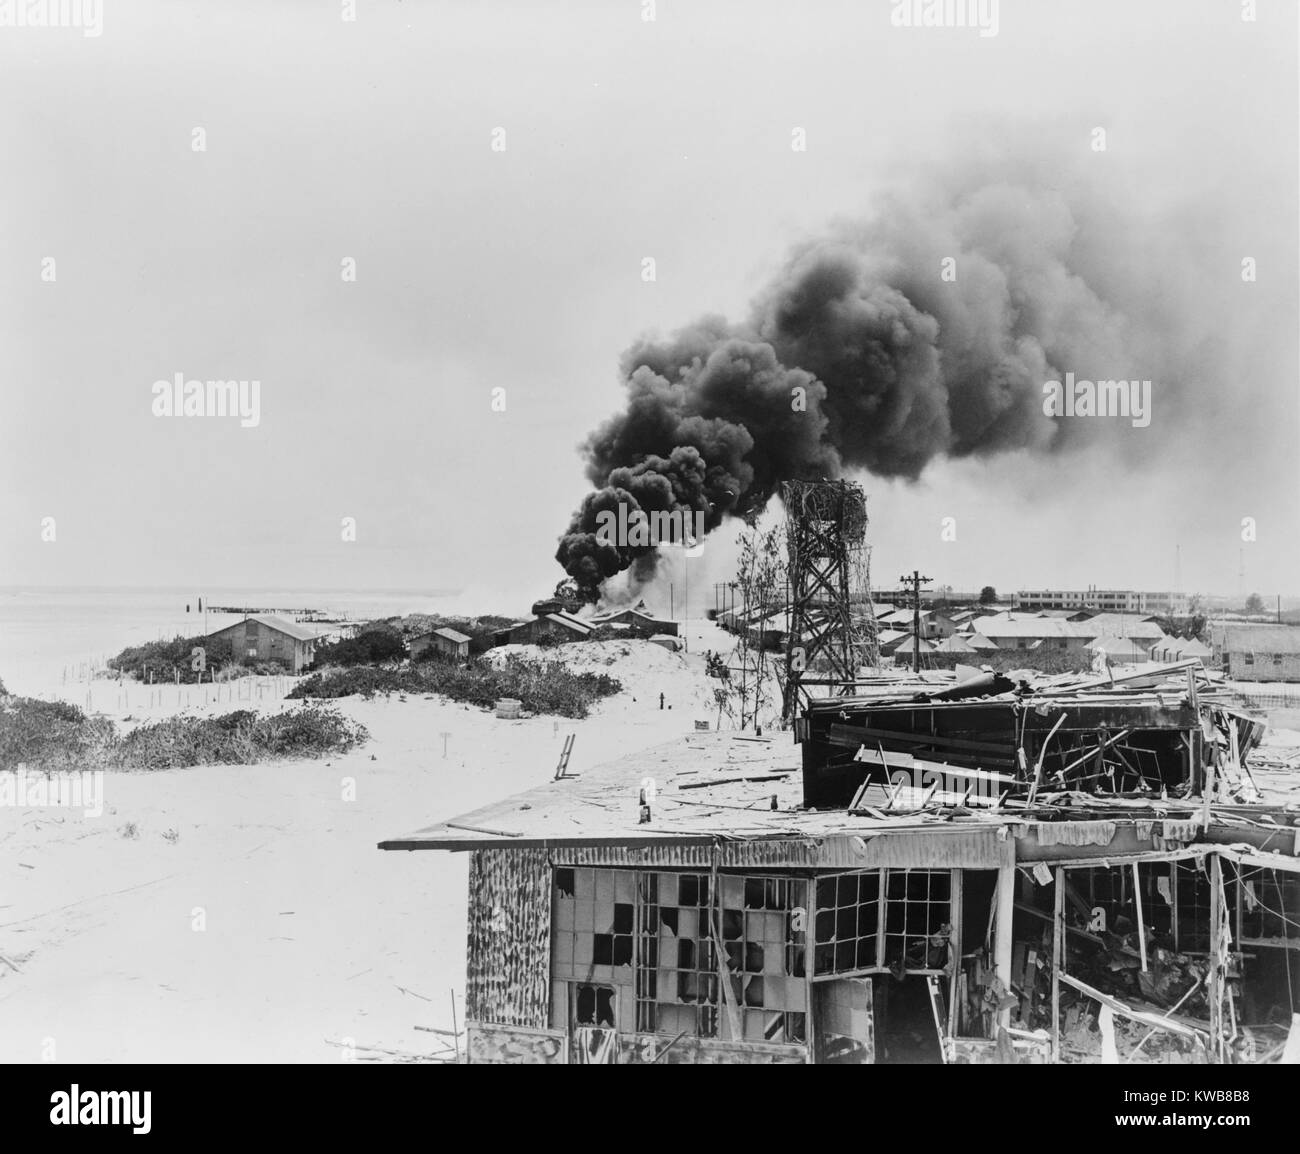 Smoke rising from burning oil tanks on Sand Island, Midway, after Japanese air attack, June 4, 1942. This marked the beginning to the two day Battle of Midway, which resulted in a decisive U.S. victory and the withdrawal of Japanese forces. World War 2. (BSLOC 2014 10 97) Stock Photo